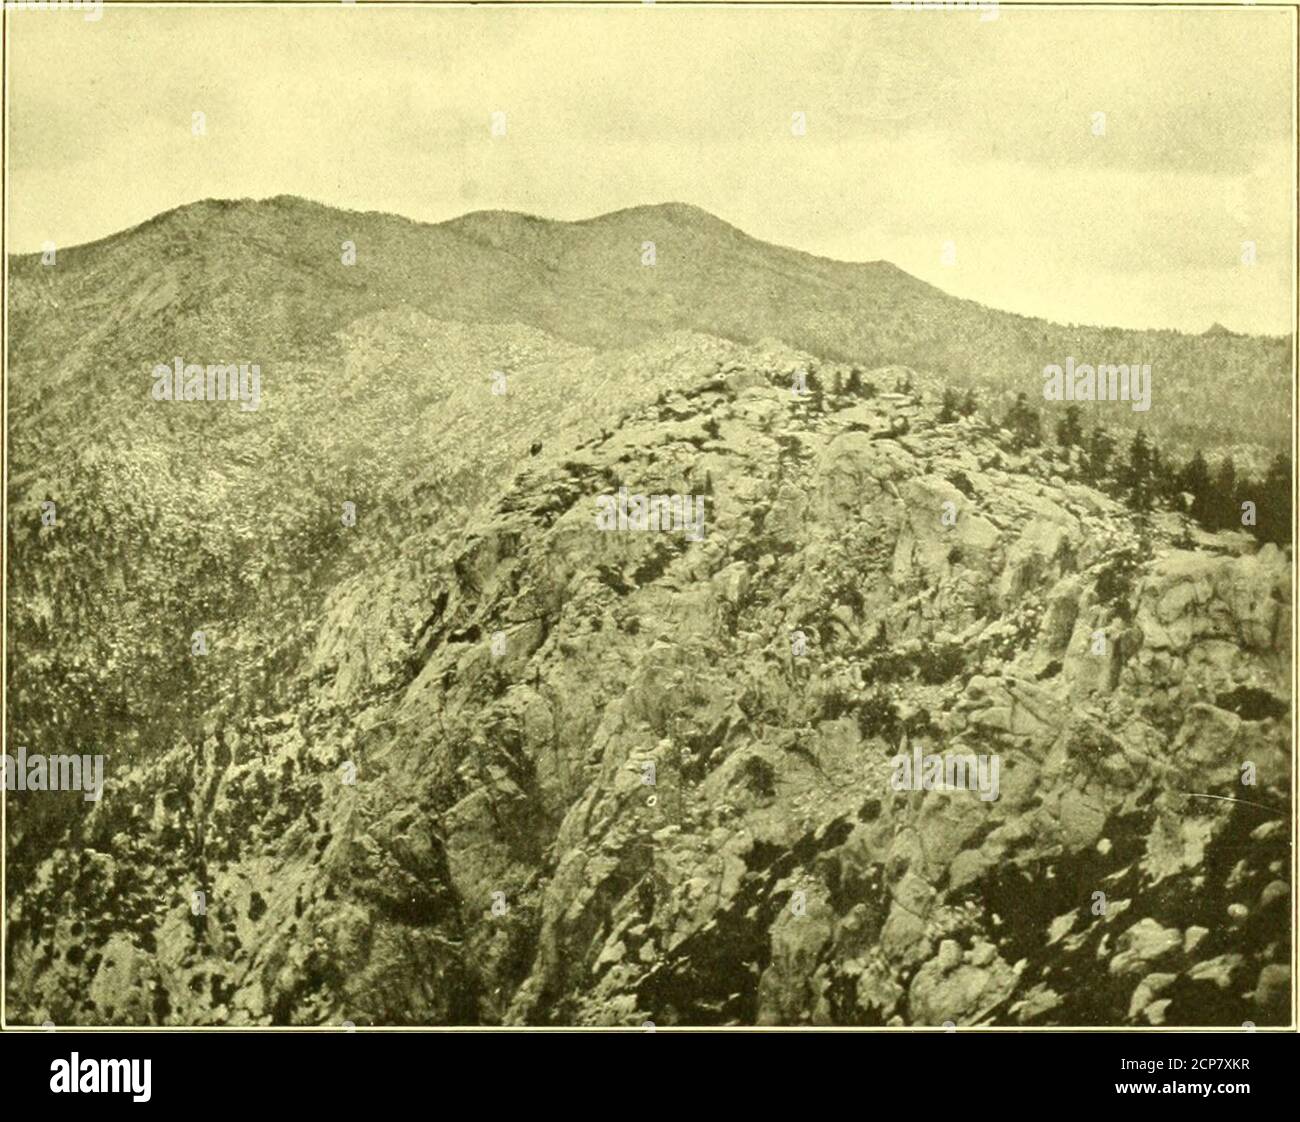 . An account of the birds and mammals of the San Jacinto area of southern California with remarks upon the behavior of geographic races on the margins of their habitats . trawberry Val-ley; at extreme right center is the edge of Tahquitz Valley. The patchesof brush in the right foreground are chiefly composed of chinquapin(Castanopsis sempervirens) and manzanita (Arctostaphylos patula). Herei- the summer borne of Passerella iliaca stephensi and the forage groundof I-, aid ruins speciosus, Imtli being animals of the upper Transition zone.The trees on the ridge at the right are chiefly Jeffrey p Stock Photo